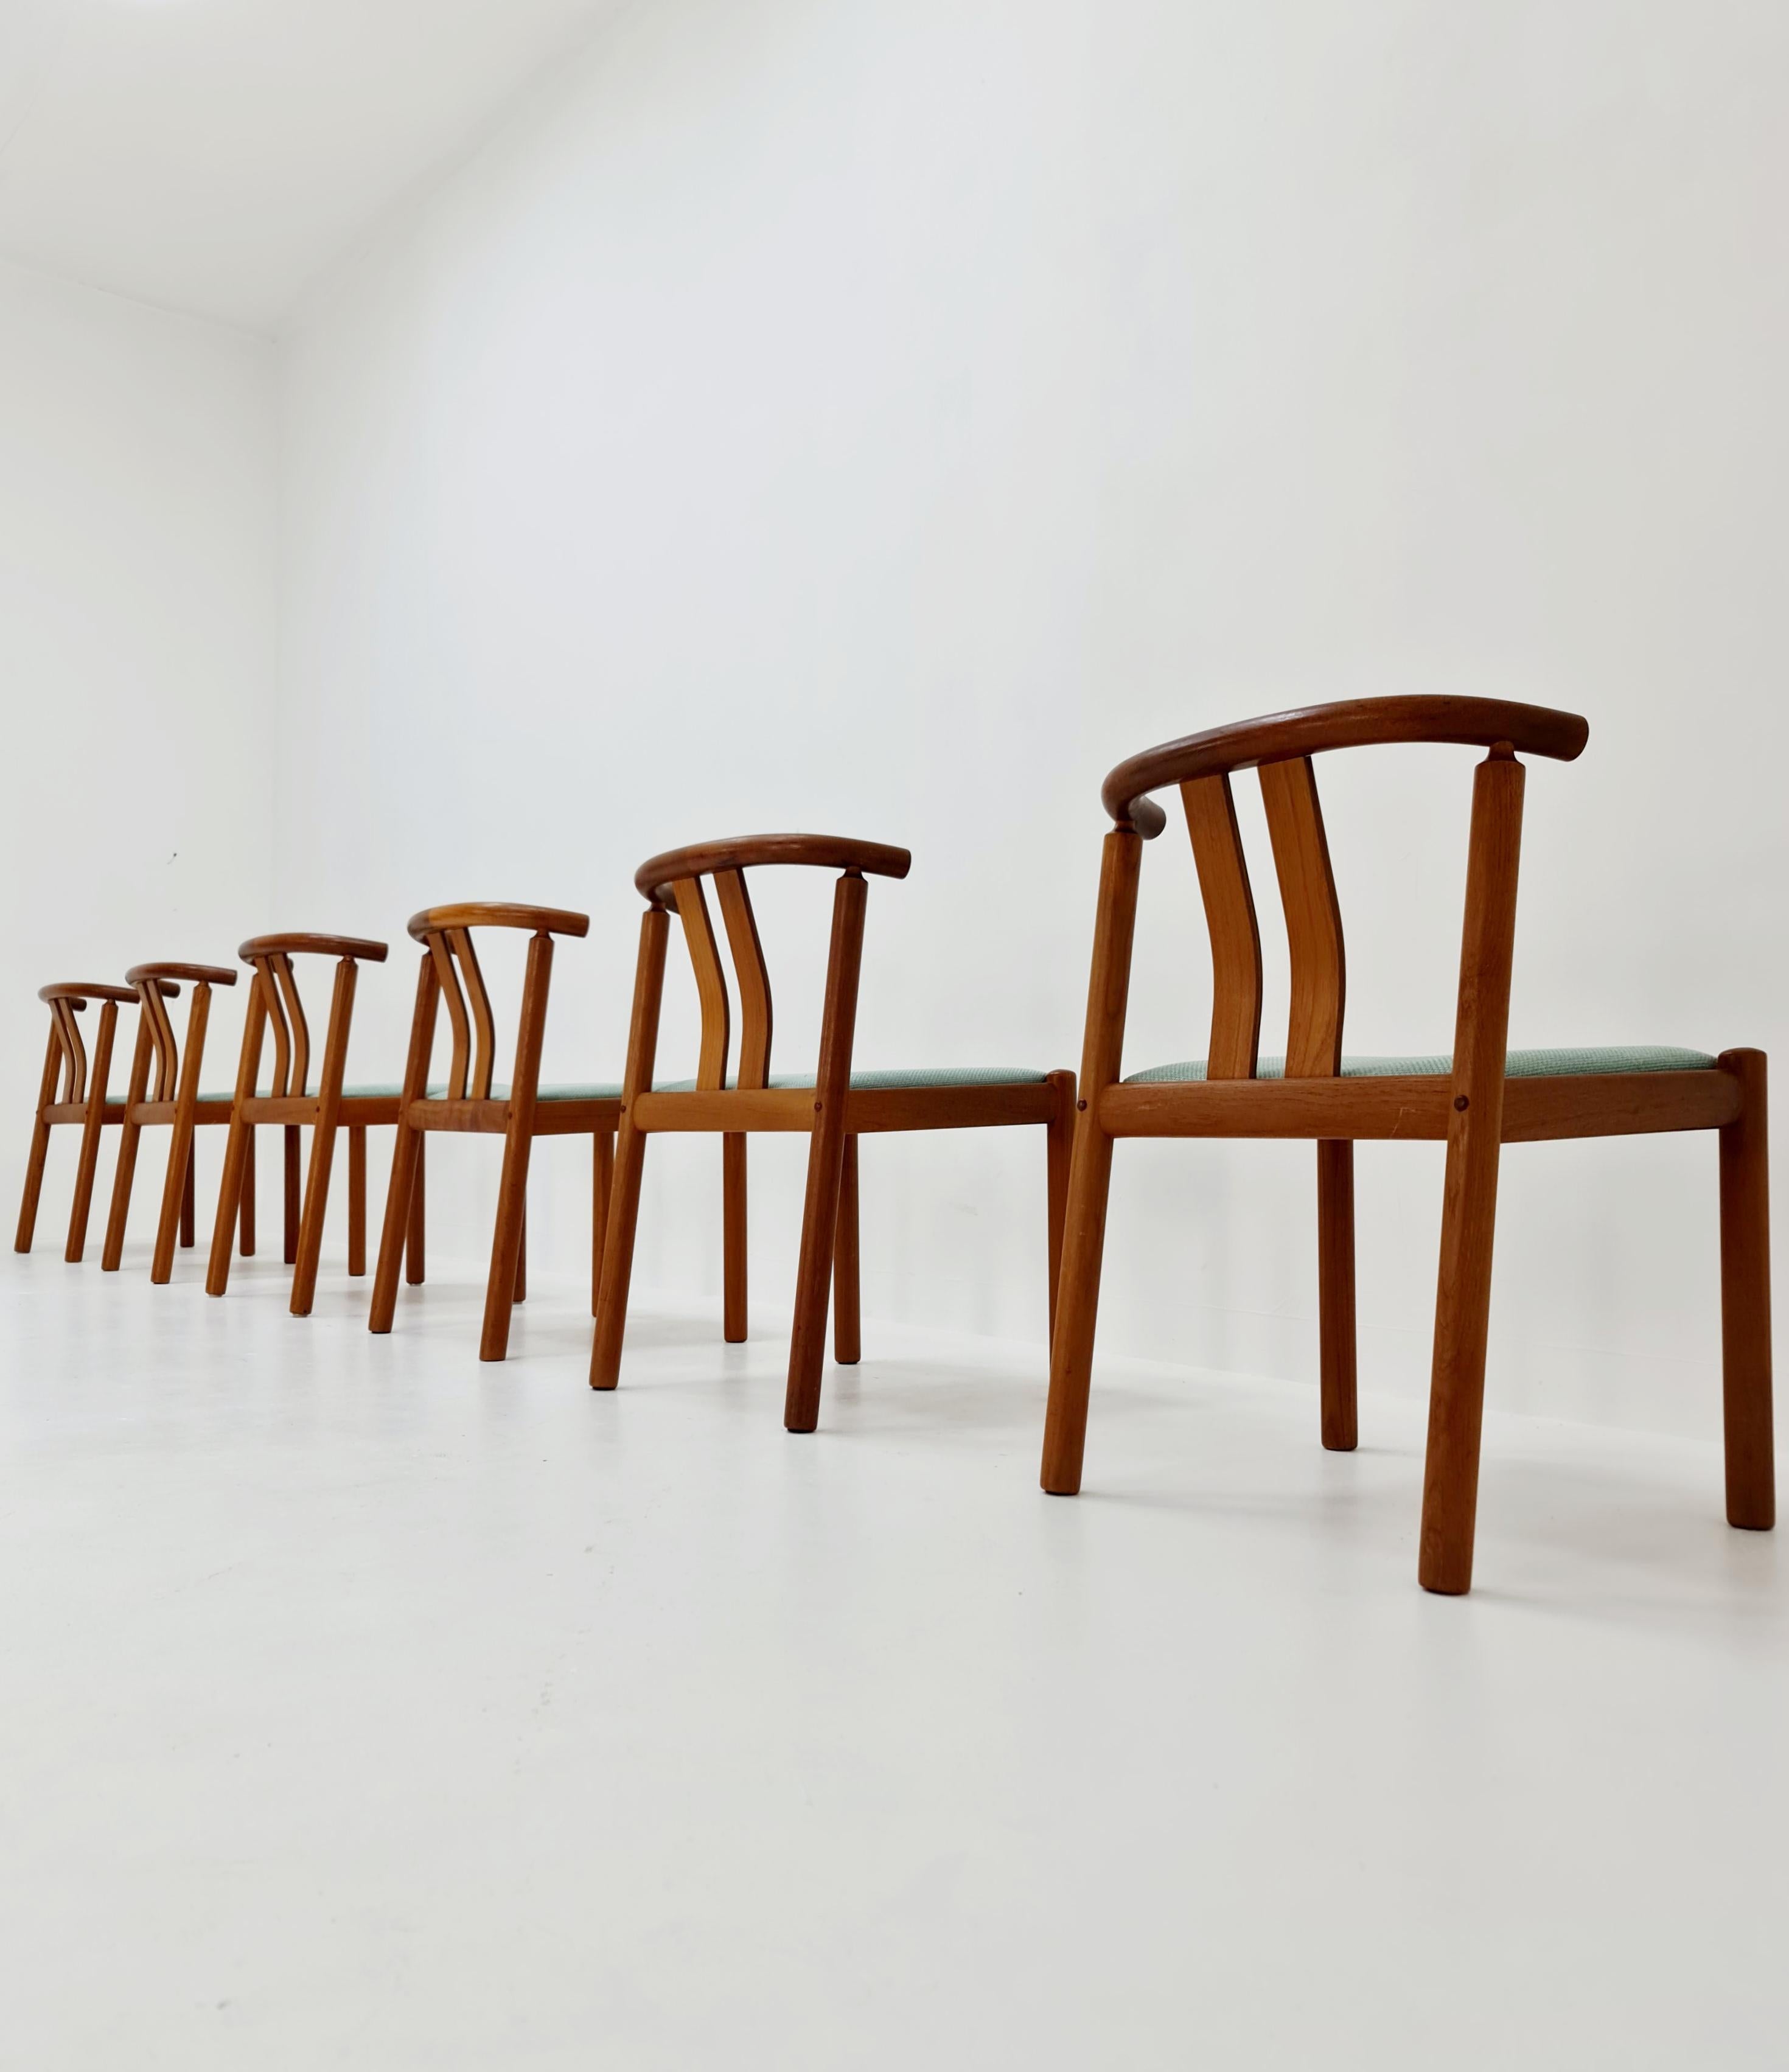 Vintage Mid Century teak dining chairs By   Hans J.Frydendal for Boltinge, 1960s, Set of 6

Made in Denmark 

The chair frames are made from solid teak, and  the fabric is new and in high quility 

Designer / Manufacturer: Hans J.Frydendal for